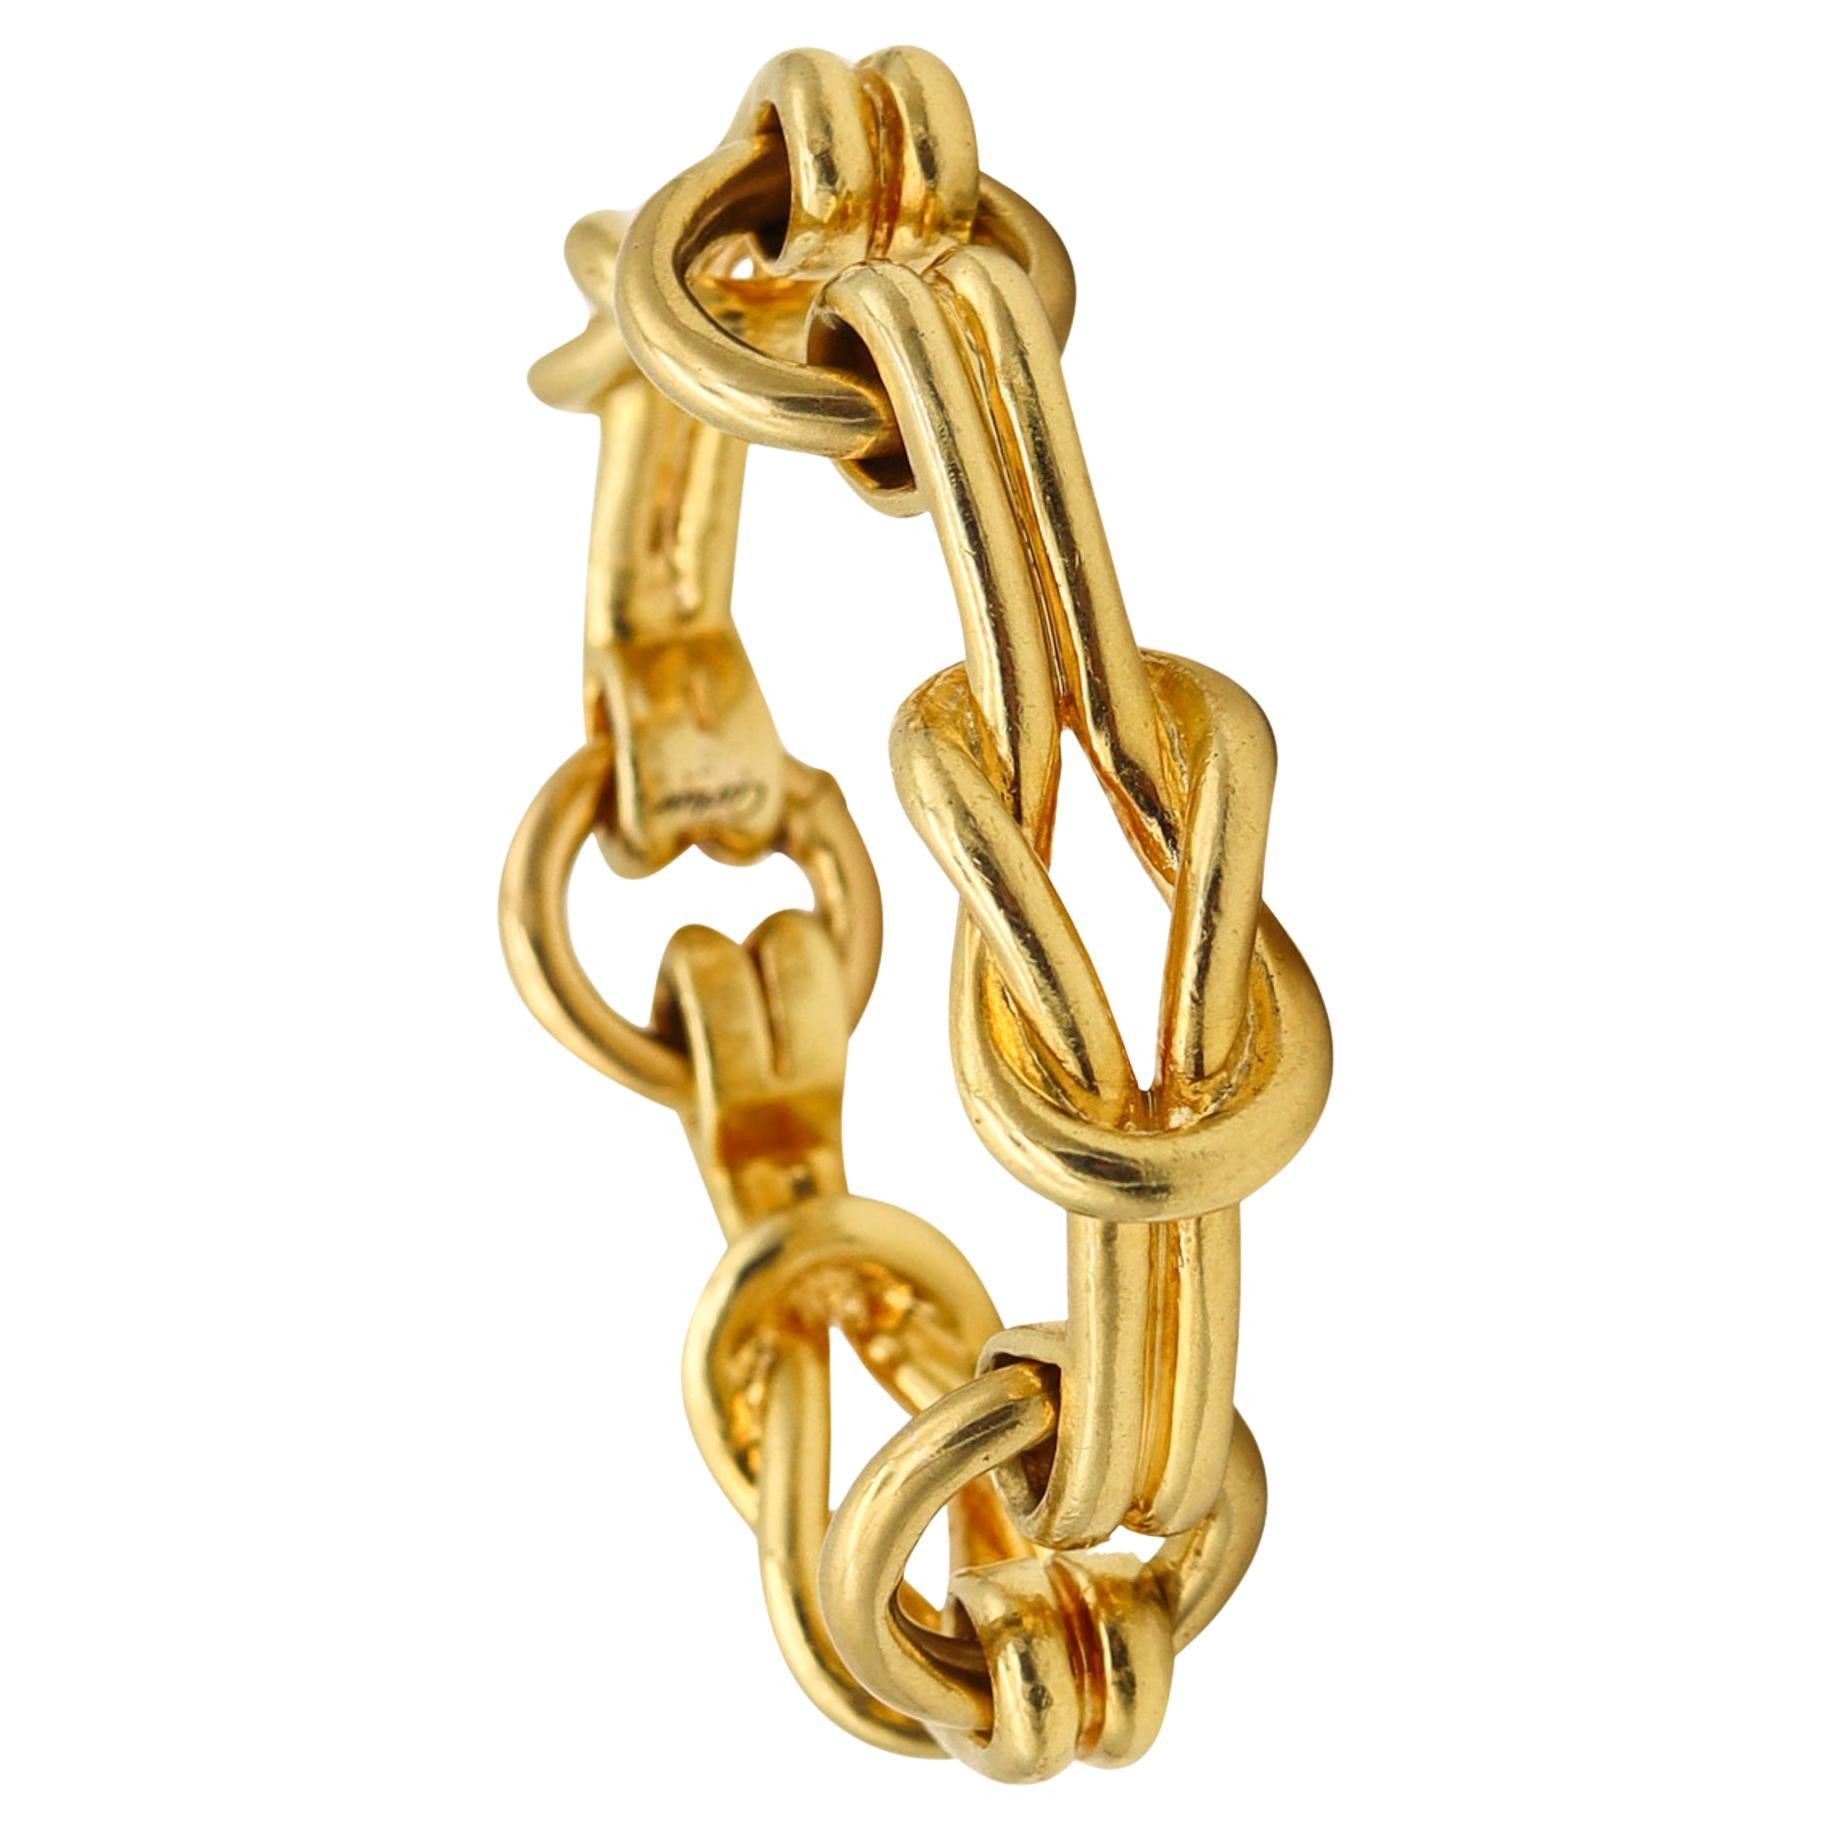 Cartier 1970 Hercules Knots Statement Links Bracelet In Solid 18Kt Yellow Gold For Sale